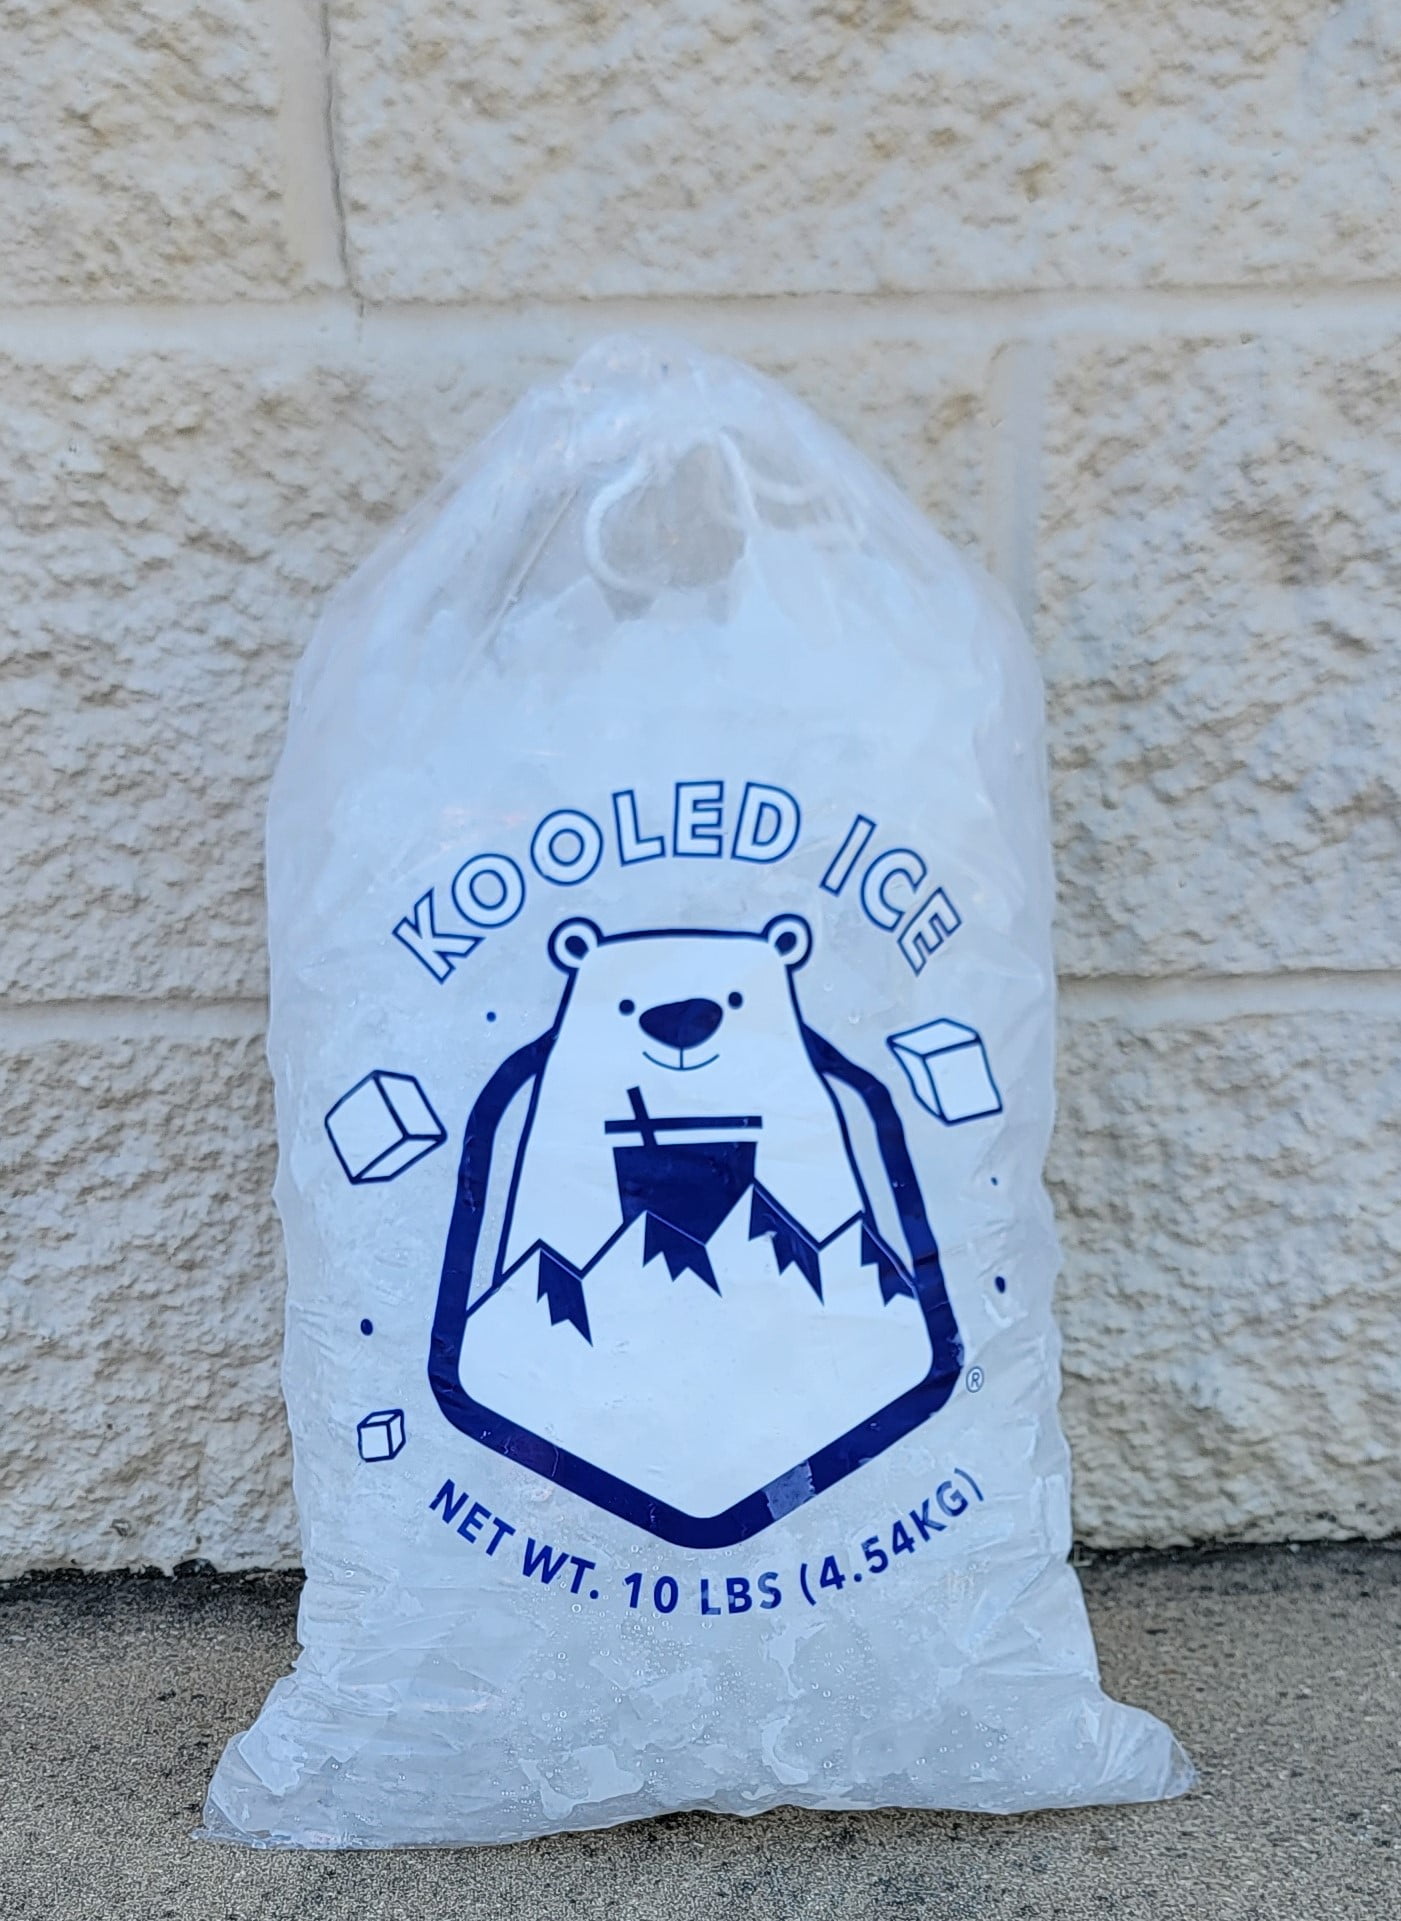 Heavy Duty Ice Poly Bags 3 mil (50 lb)